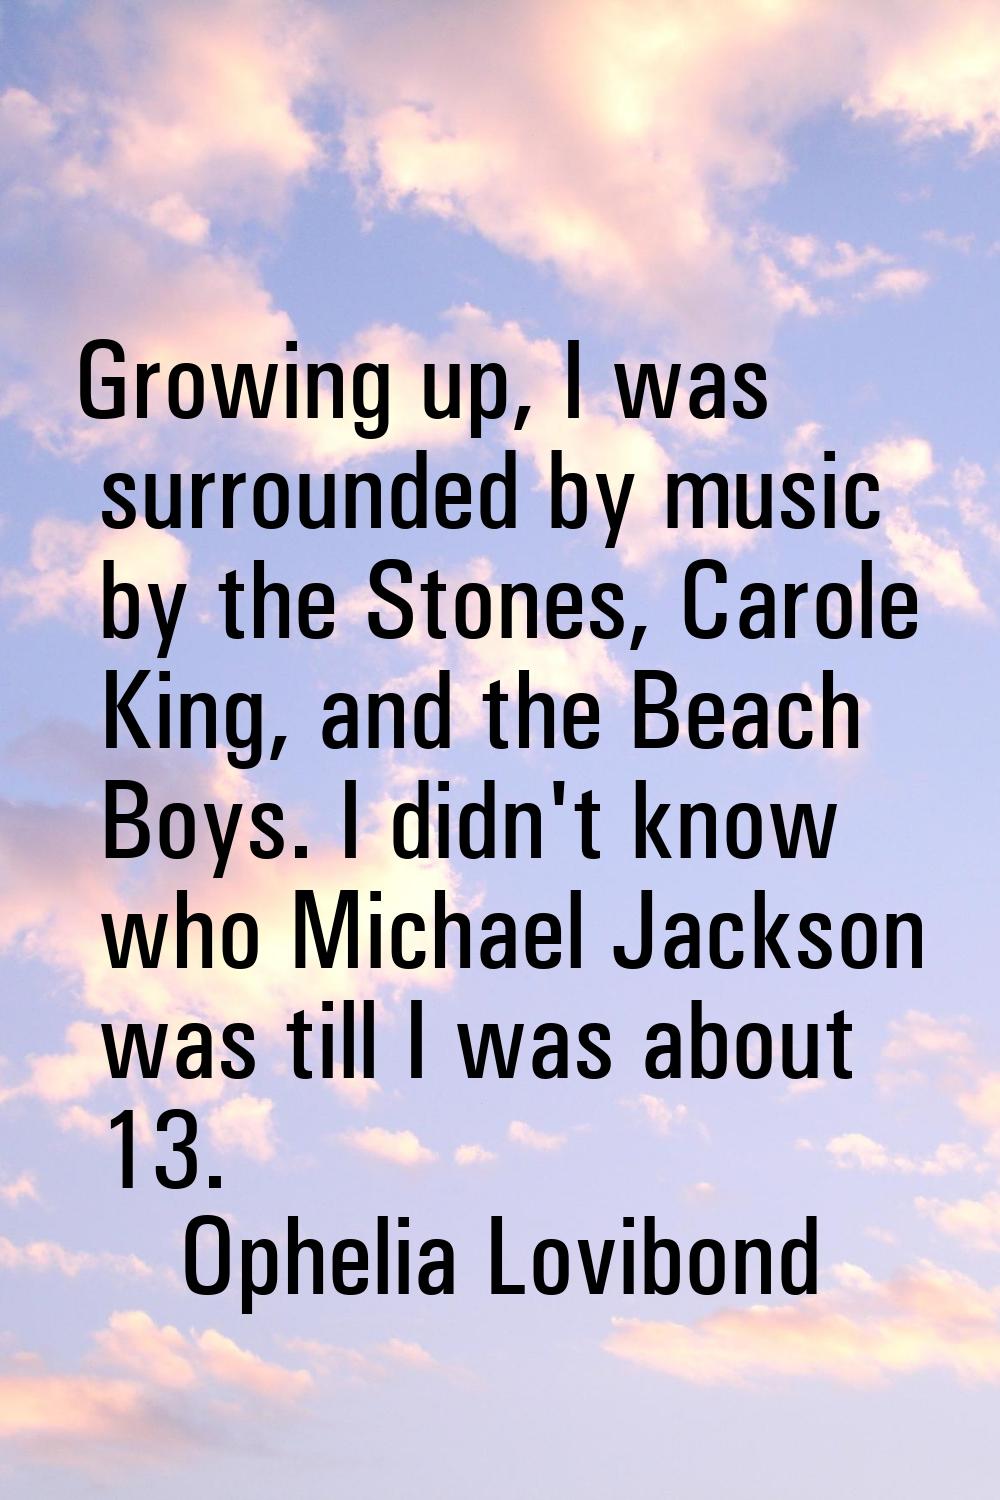 Growing up, I was surrounded by music by the Stones, Carole King, and the Beach Boys. I didn't know